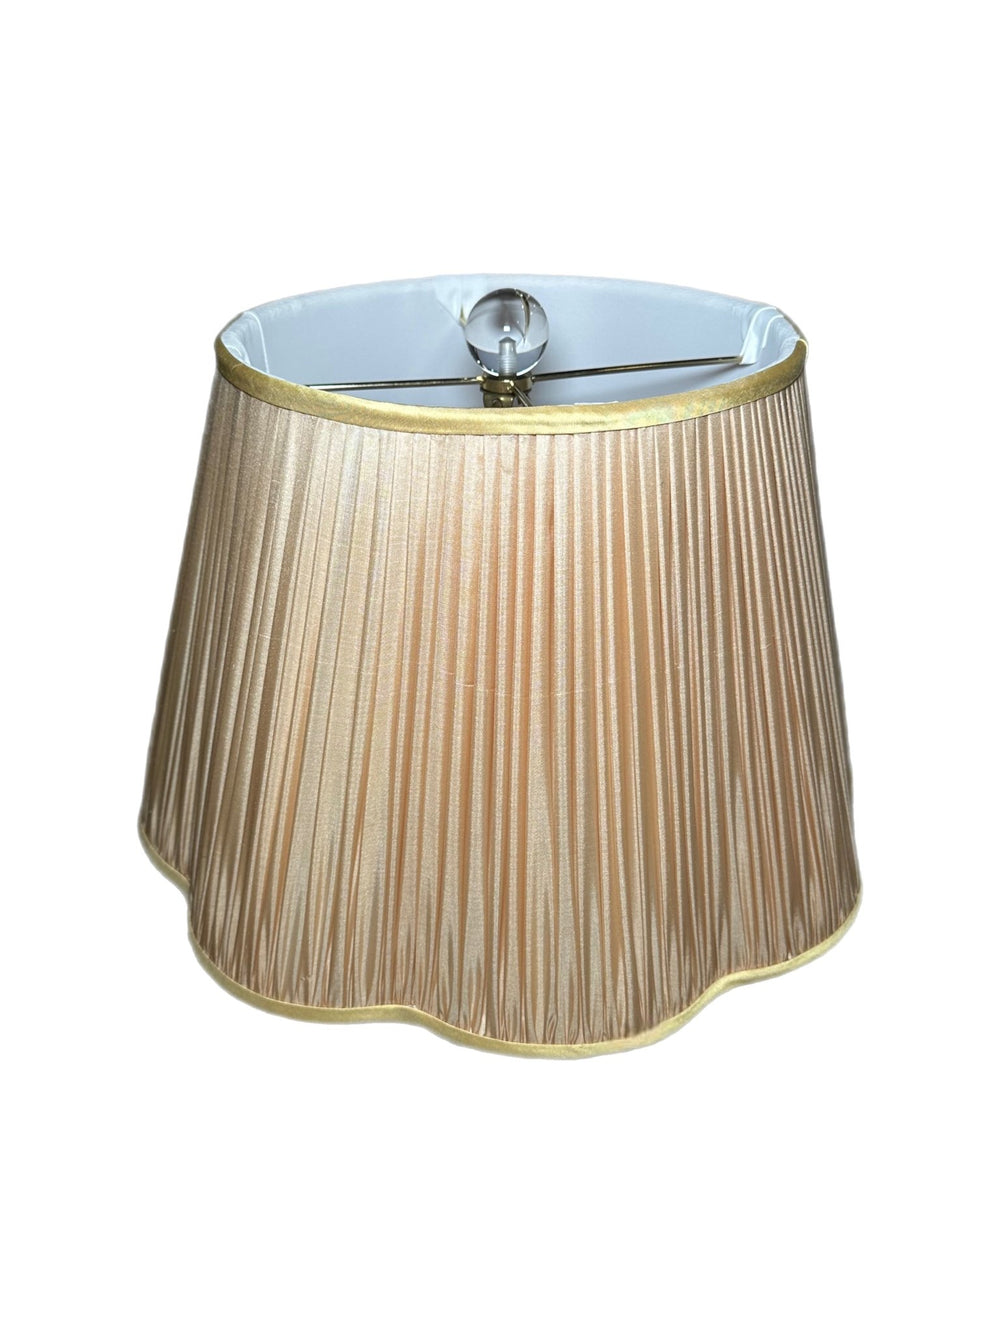 16" Silk Out scalloped - (1) in stock - Lux Lamp Shades